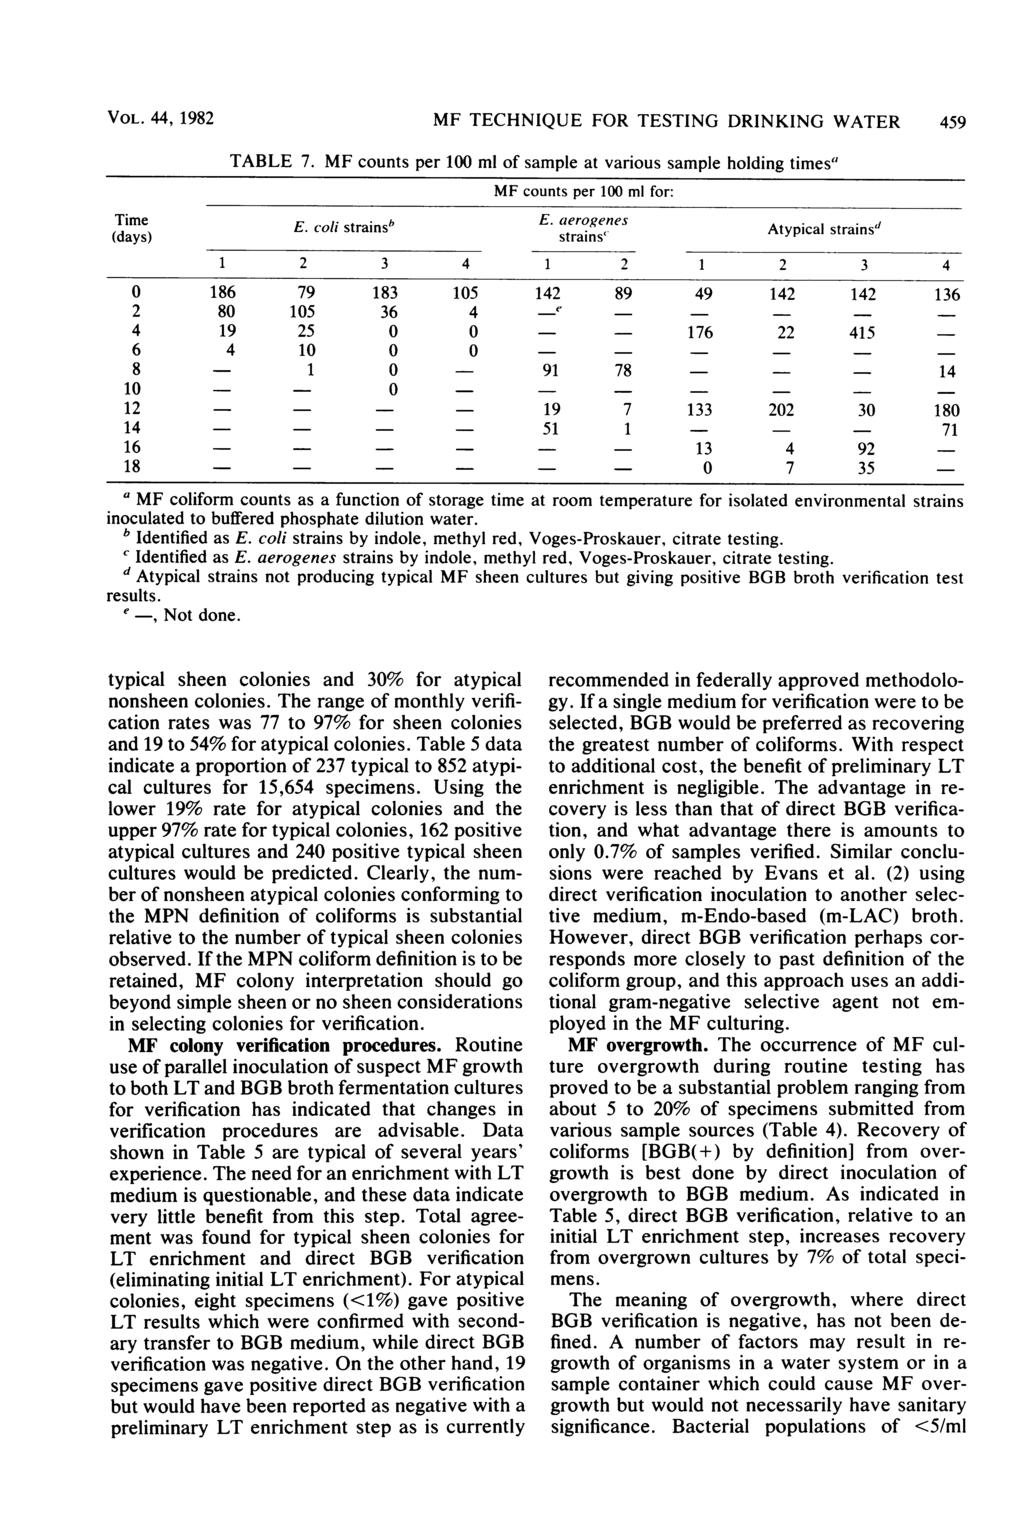 VOL. 44, 1982 MF TECHNIQUE FOR TESTING DRINKING WATER 459 TABLE 7. MF counts per 100 ml of sample at various sample holding times' MF counts per 100 ml for: Time E. coli strainsb E.